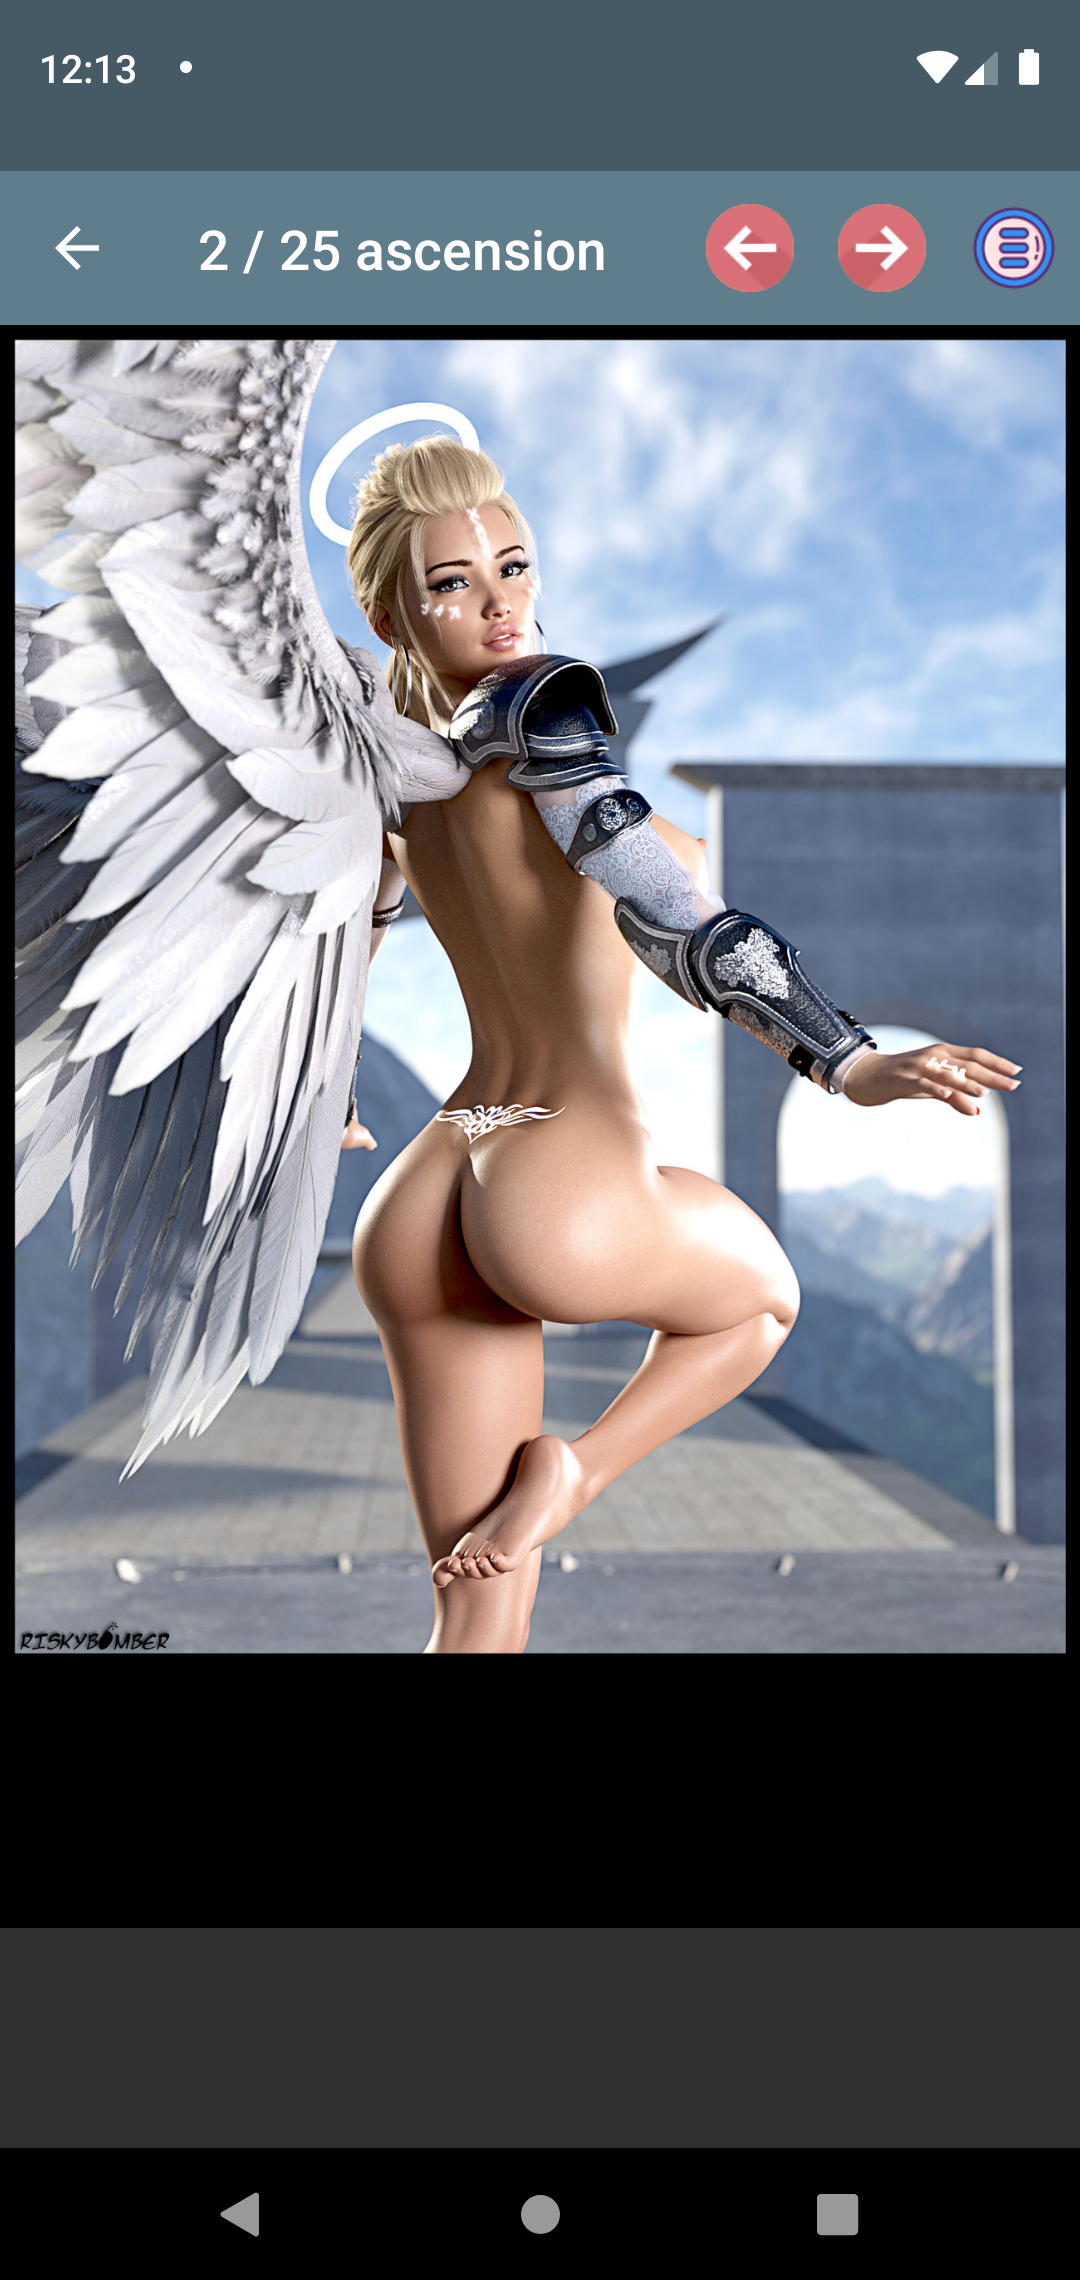 Risky Bomber Pictures gallery,adult,sexy,anal,pic,porn,art,hentsi,toys,android,for,hentia,erotic,pics,henti,picd,best,tattoo,hentai,apk,photos,apps,hot,app,futanari